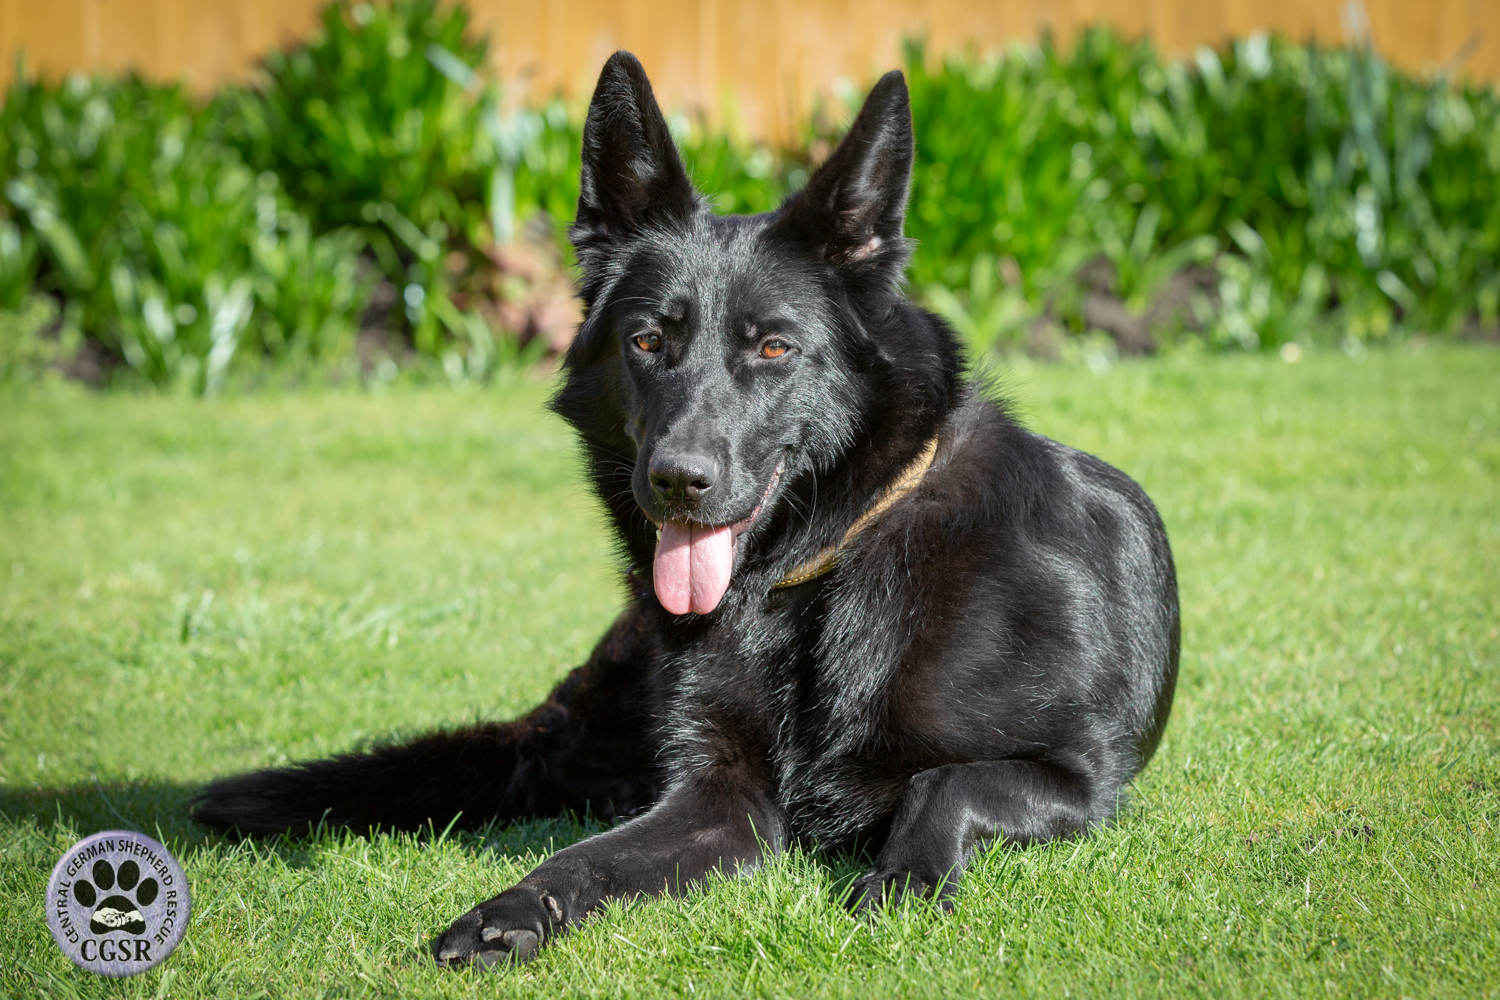 Darcy - currently looking for adoption with Central German Shepherd Rescue